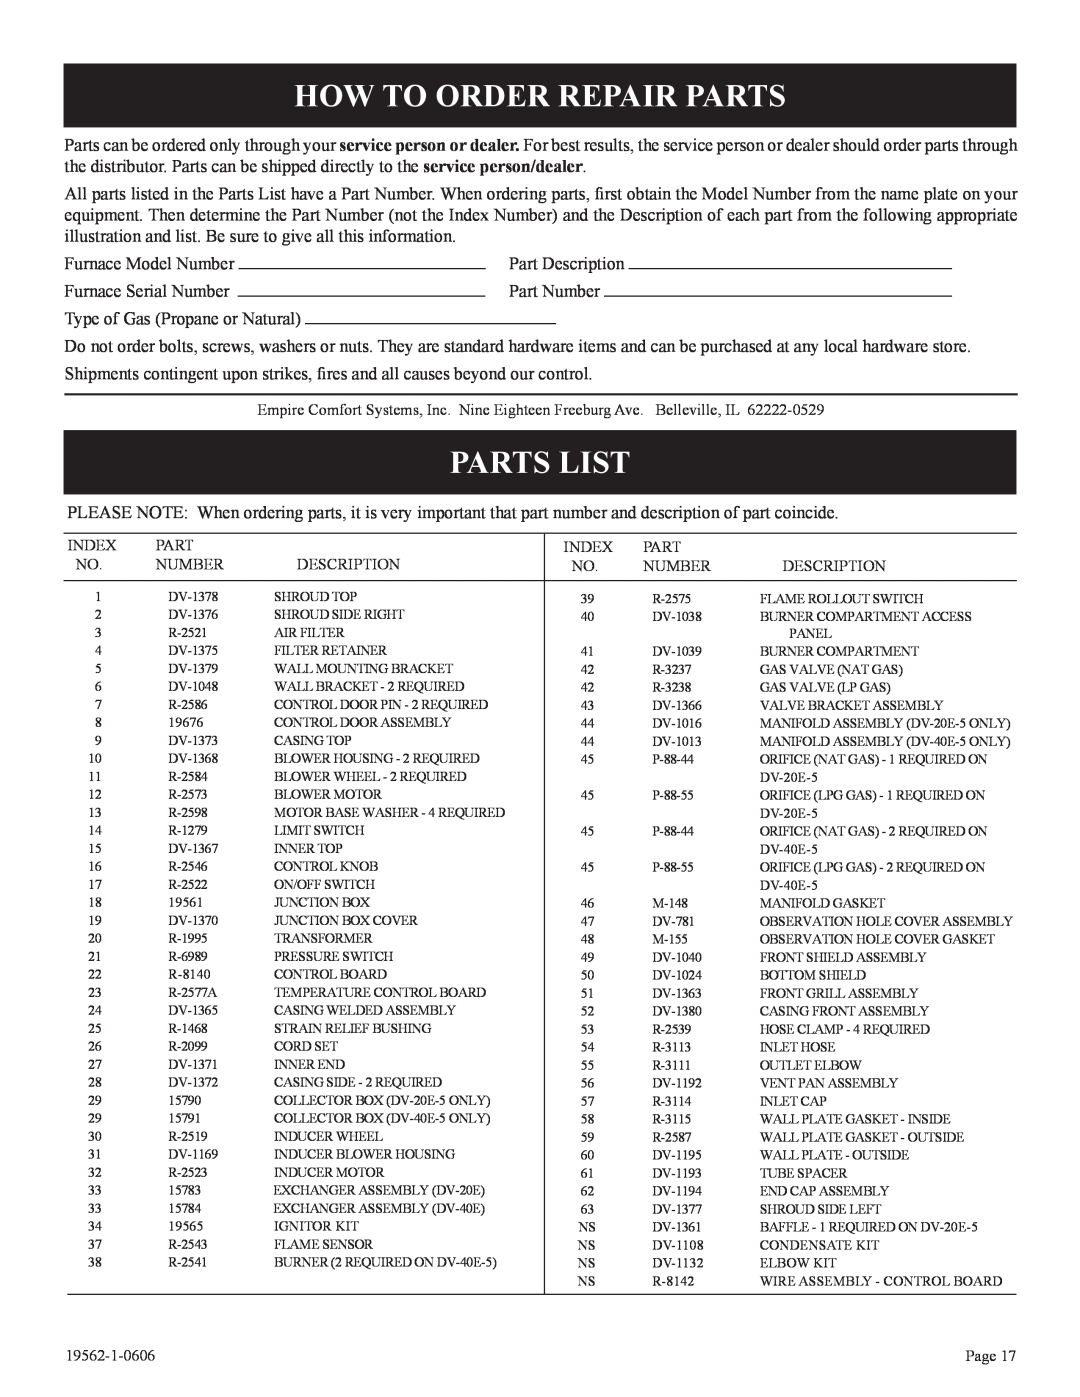 Langley/Empire DV-40E-5, DV-20E-5 installation instructions How To Order Repair Parts, Parts List 